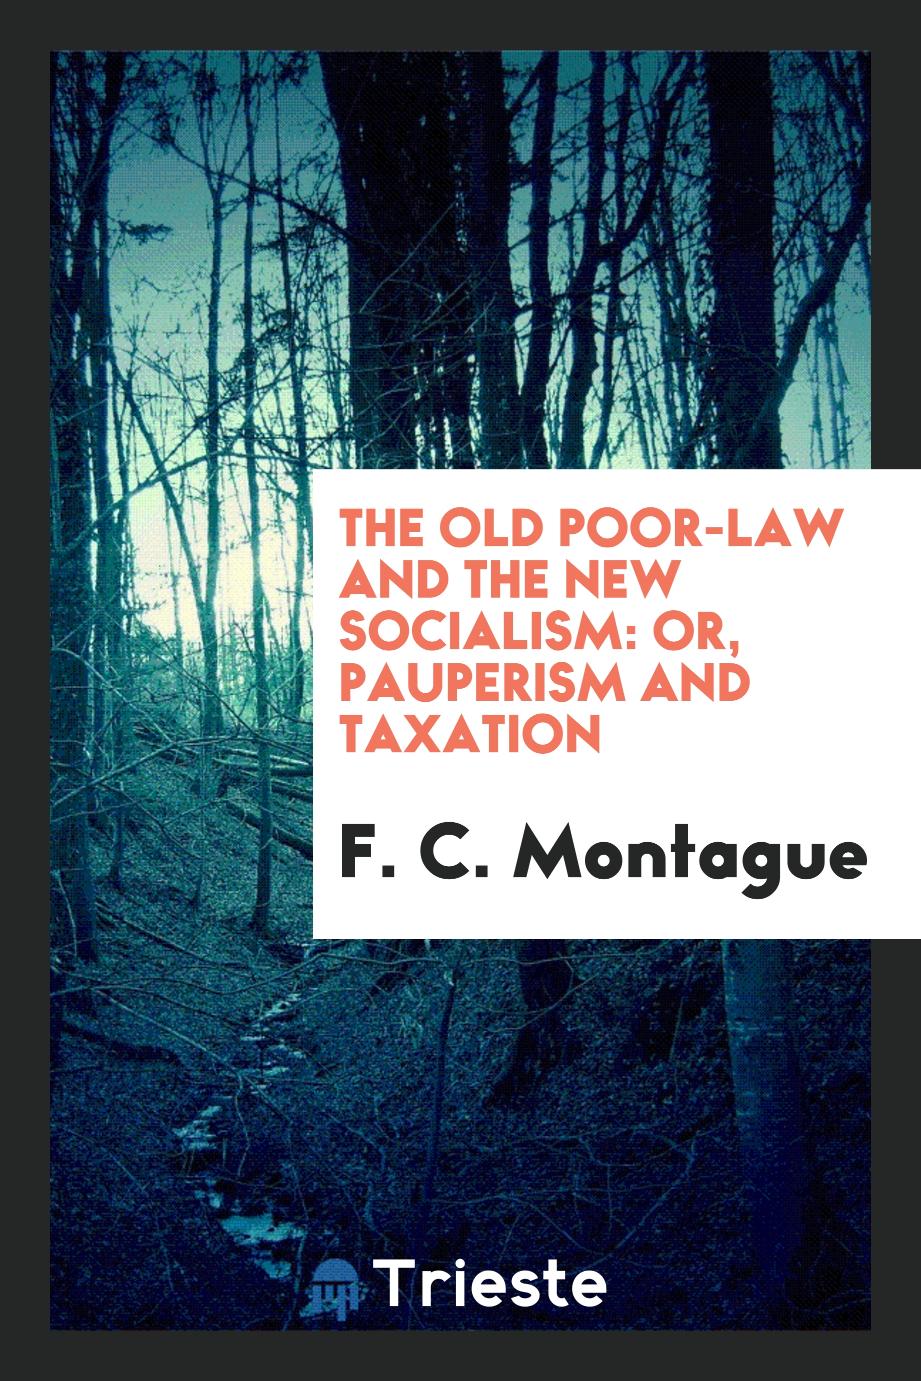 The old poor-law and the new socialism: or, Pauperism and taxation